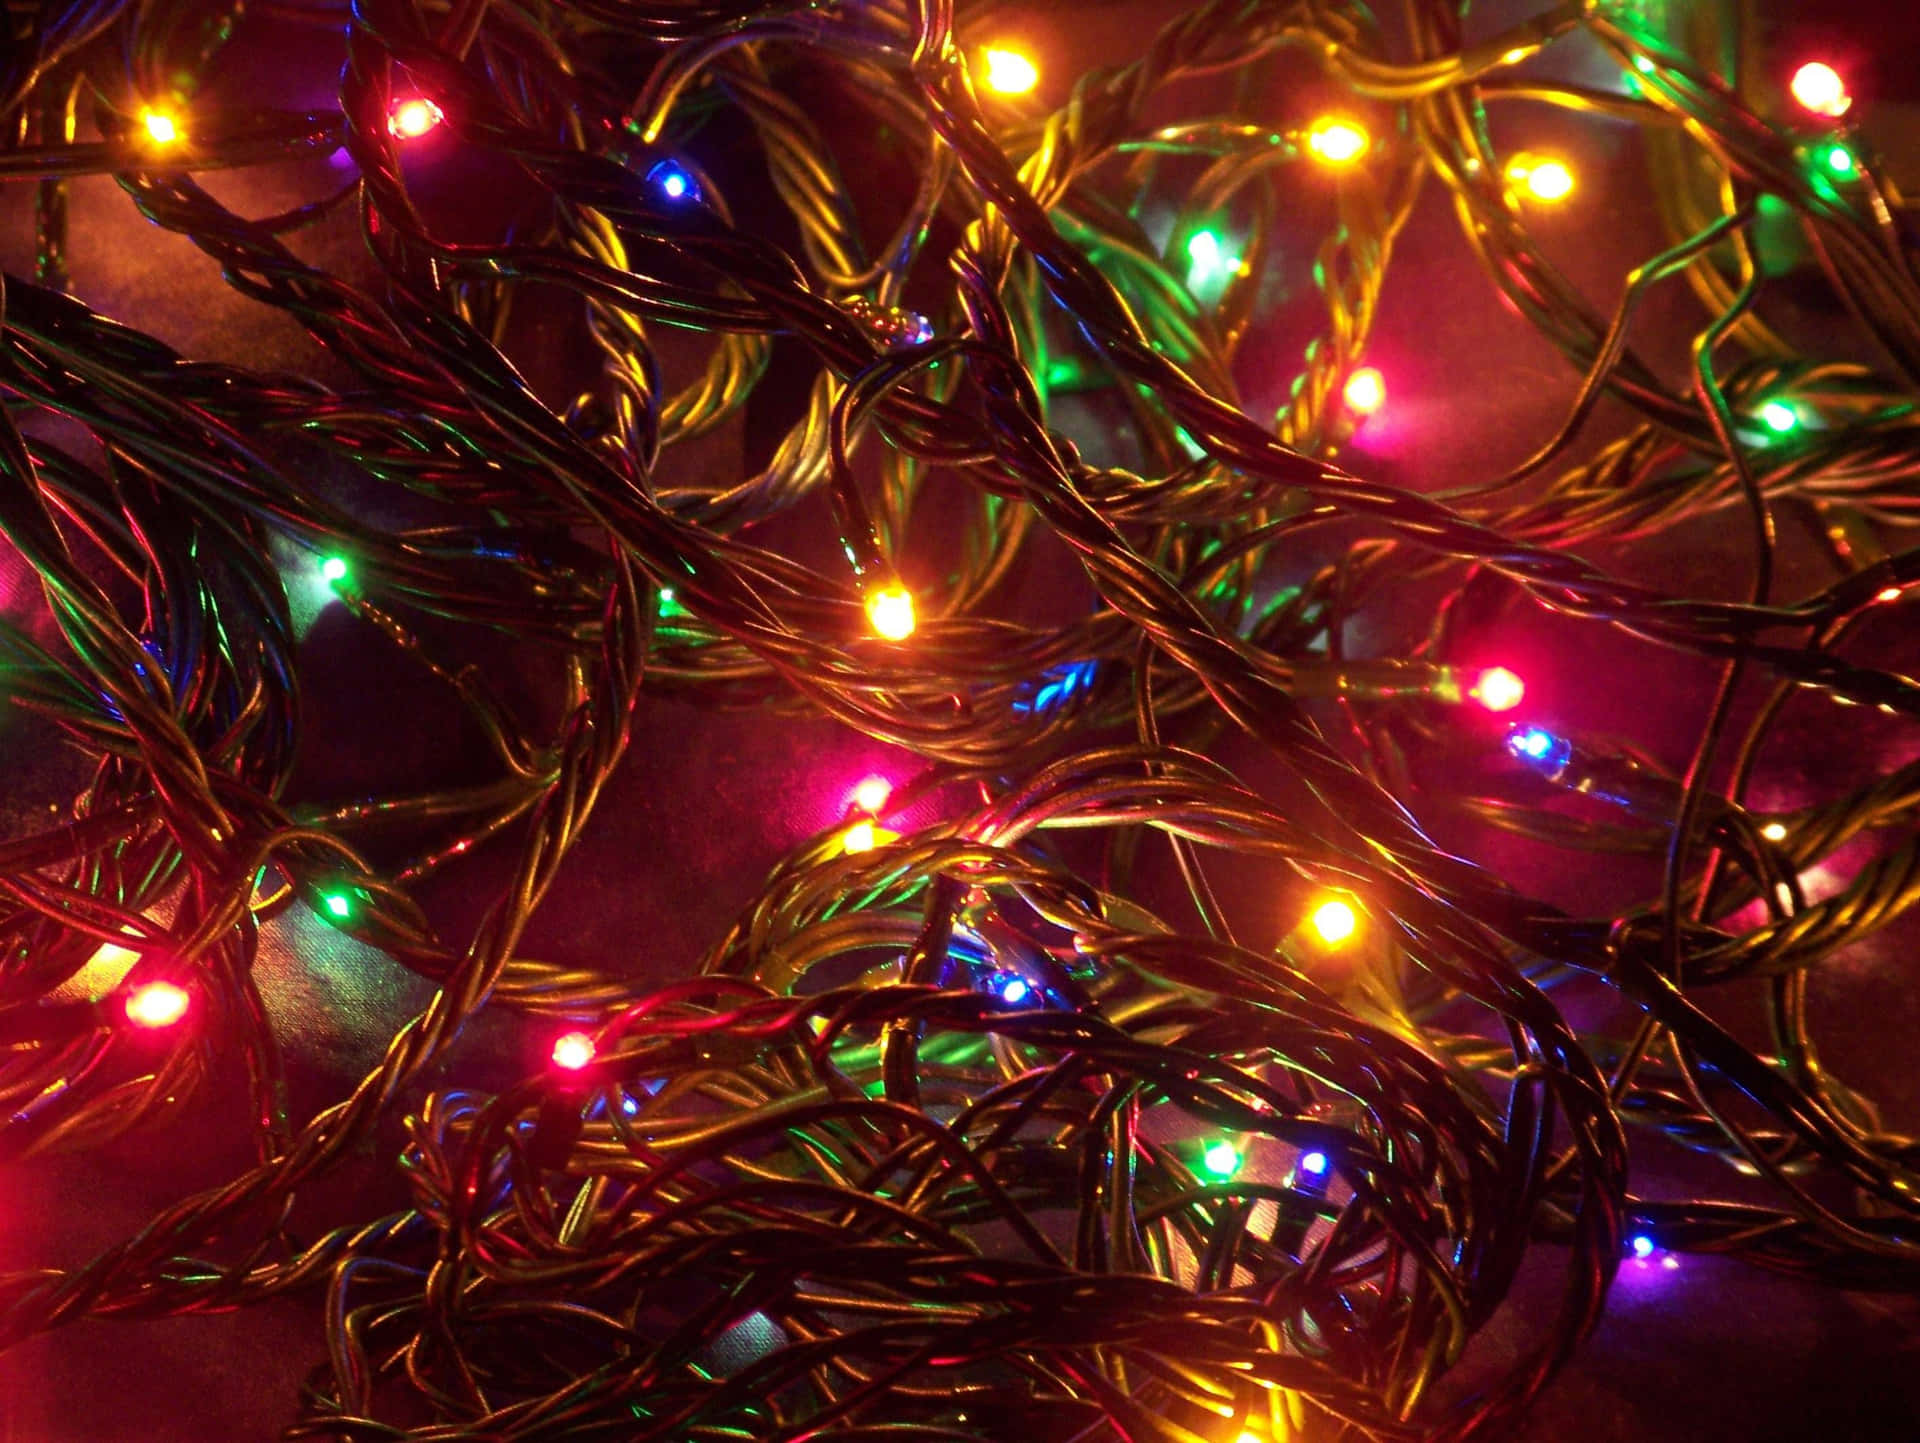 Brighten your night with these sparkling Christmas Lights